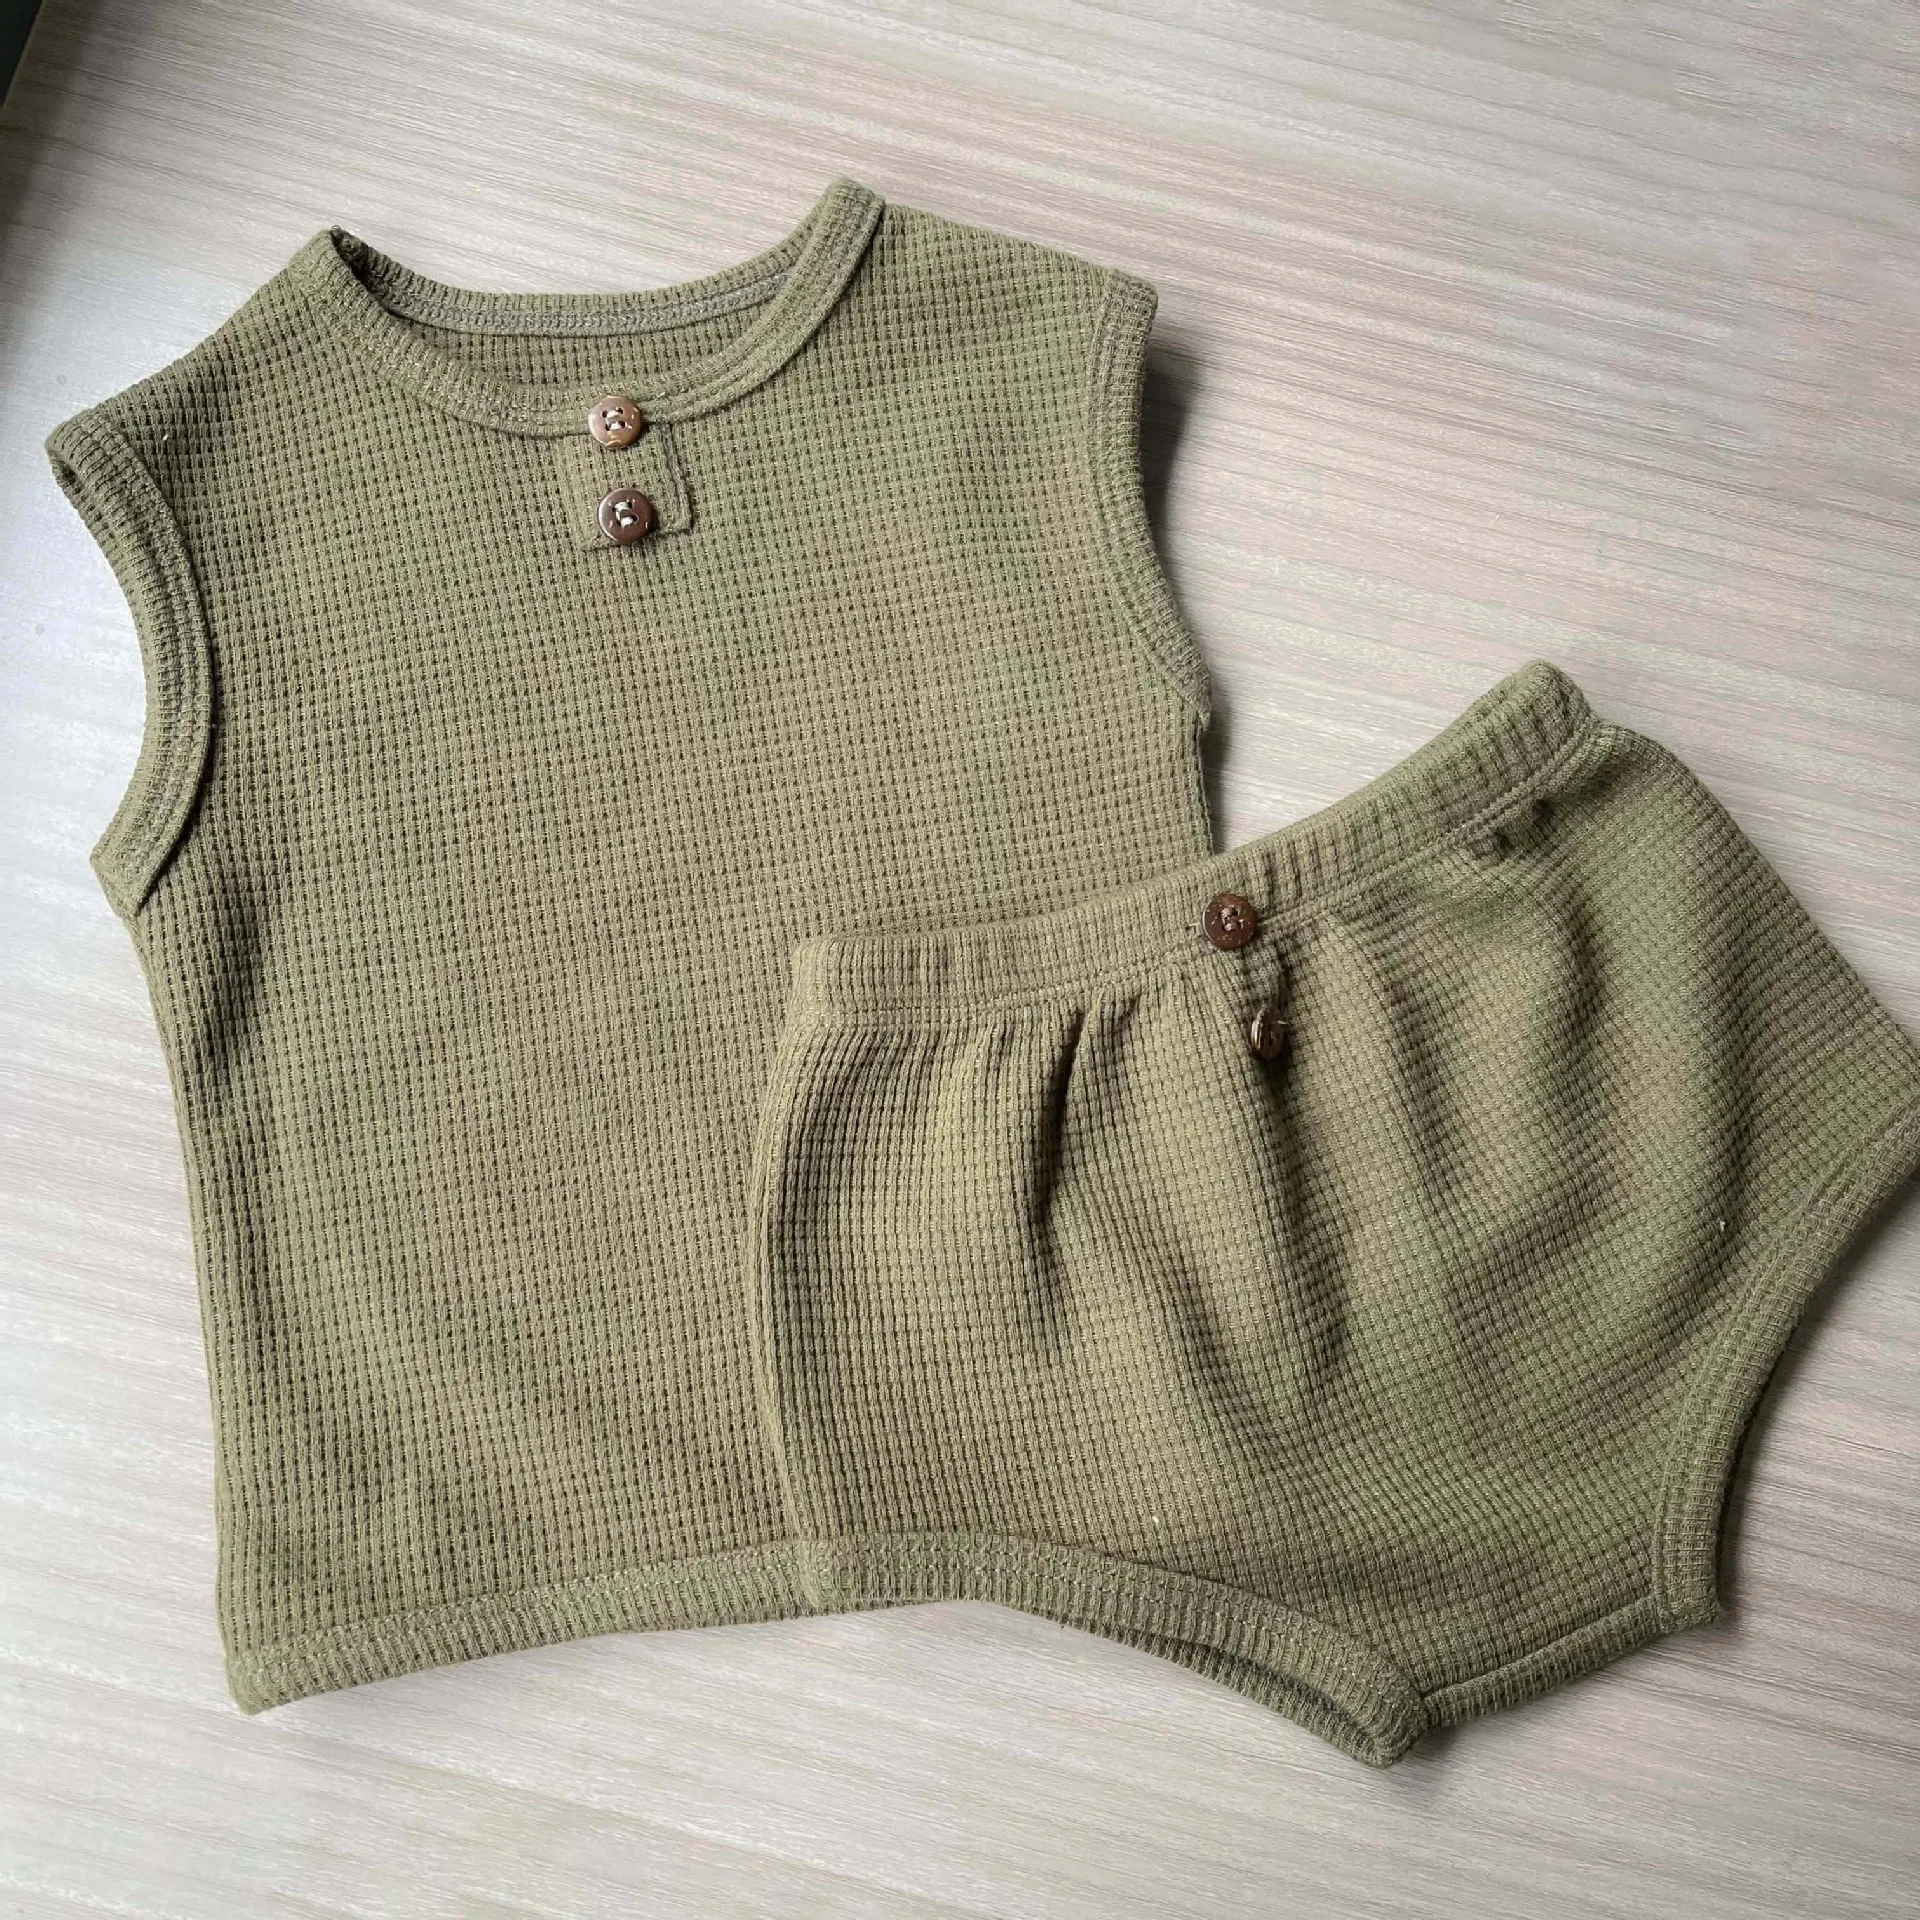 Newest knitted super soft newborn infant baby waffle sleeveless tank top jogger summer shorts outfits set pajamas for baby boys